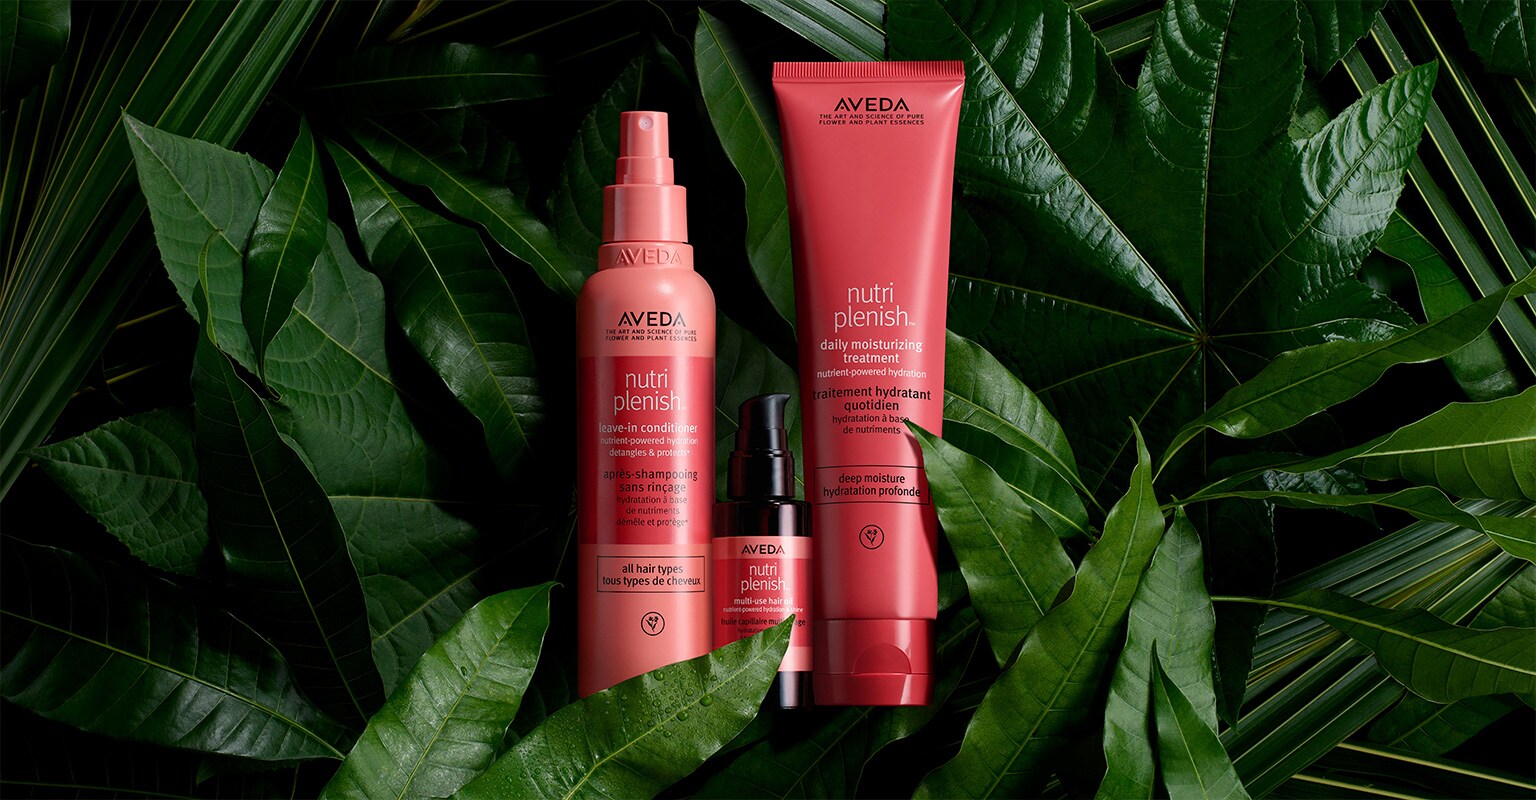 Aveda botanical repair collection - winner of the Marie Claire Prix D’Excellence award